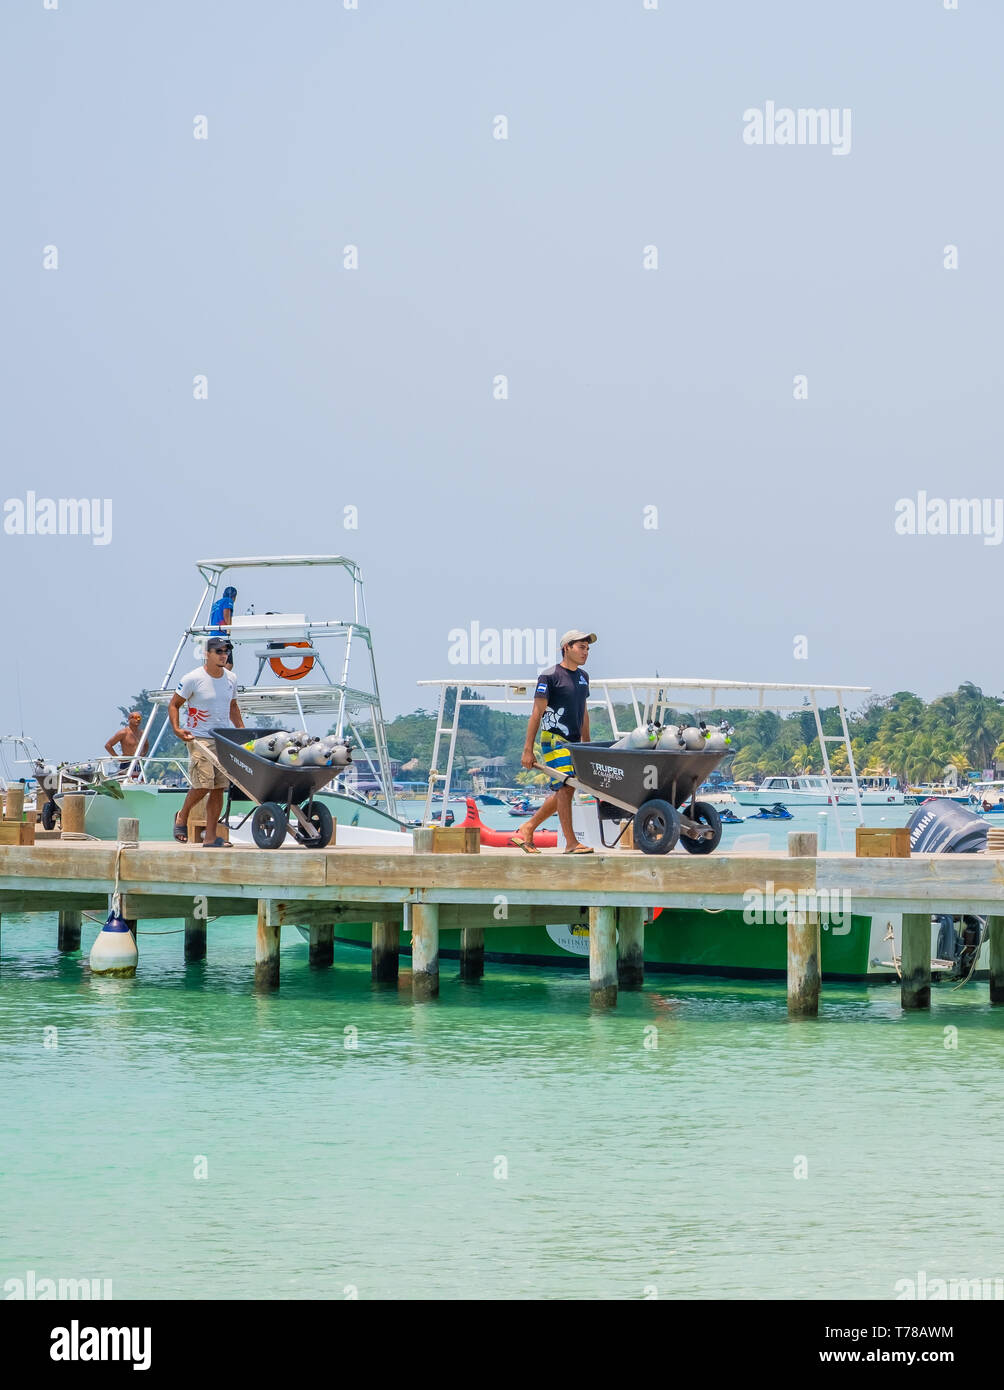 Workers remove depleted SCUBA tanks from a tourist dive boat at West Bay Beach Roatan Honduras. Stock Photo